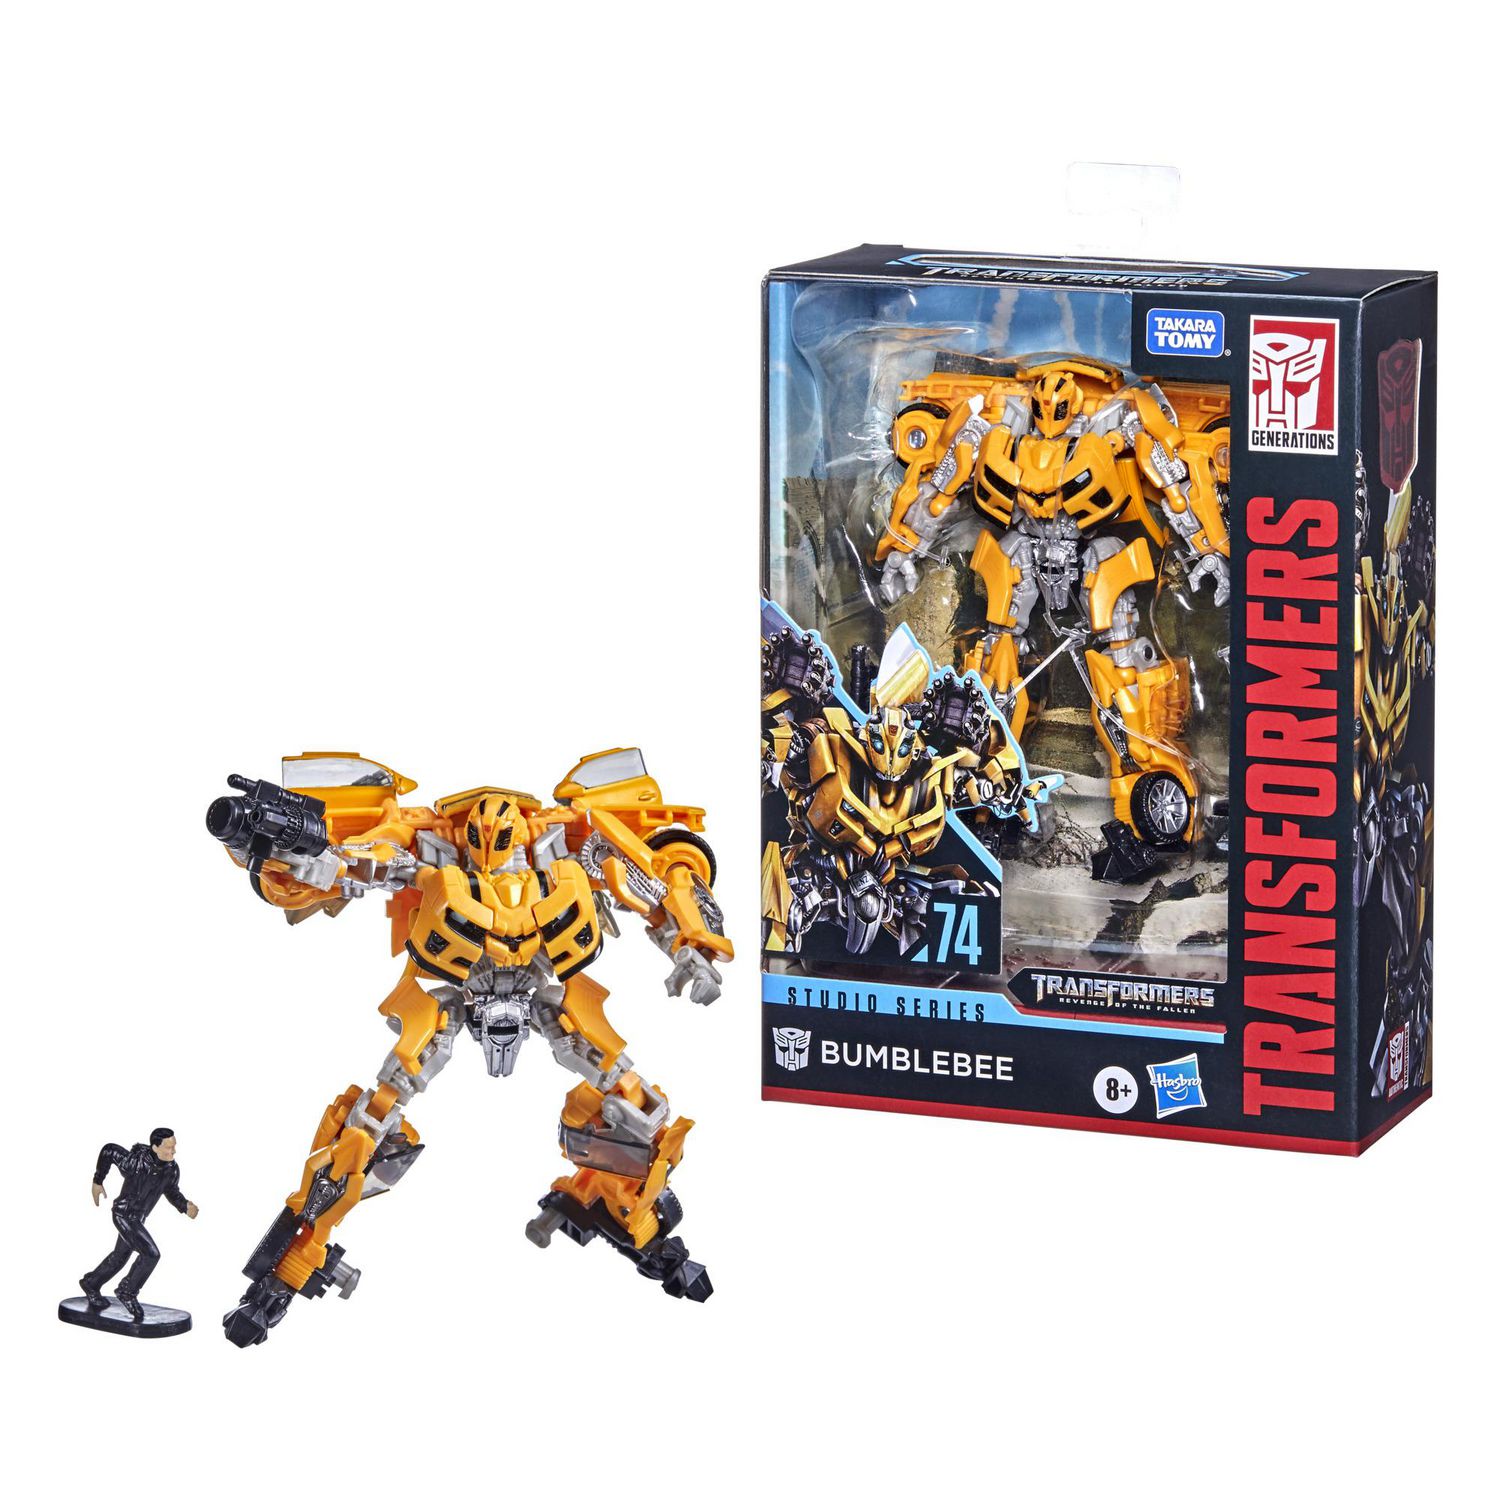 Sealed Transformers® Movie - Revenge of the Fallen (ROTF) Ultimate Class Ultimate  Bumblebee SKU 368230   - Largest selection & best  prices on new used and vintage Transformers® figures and toys